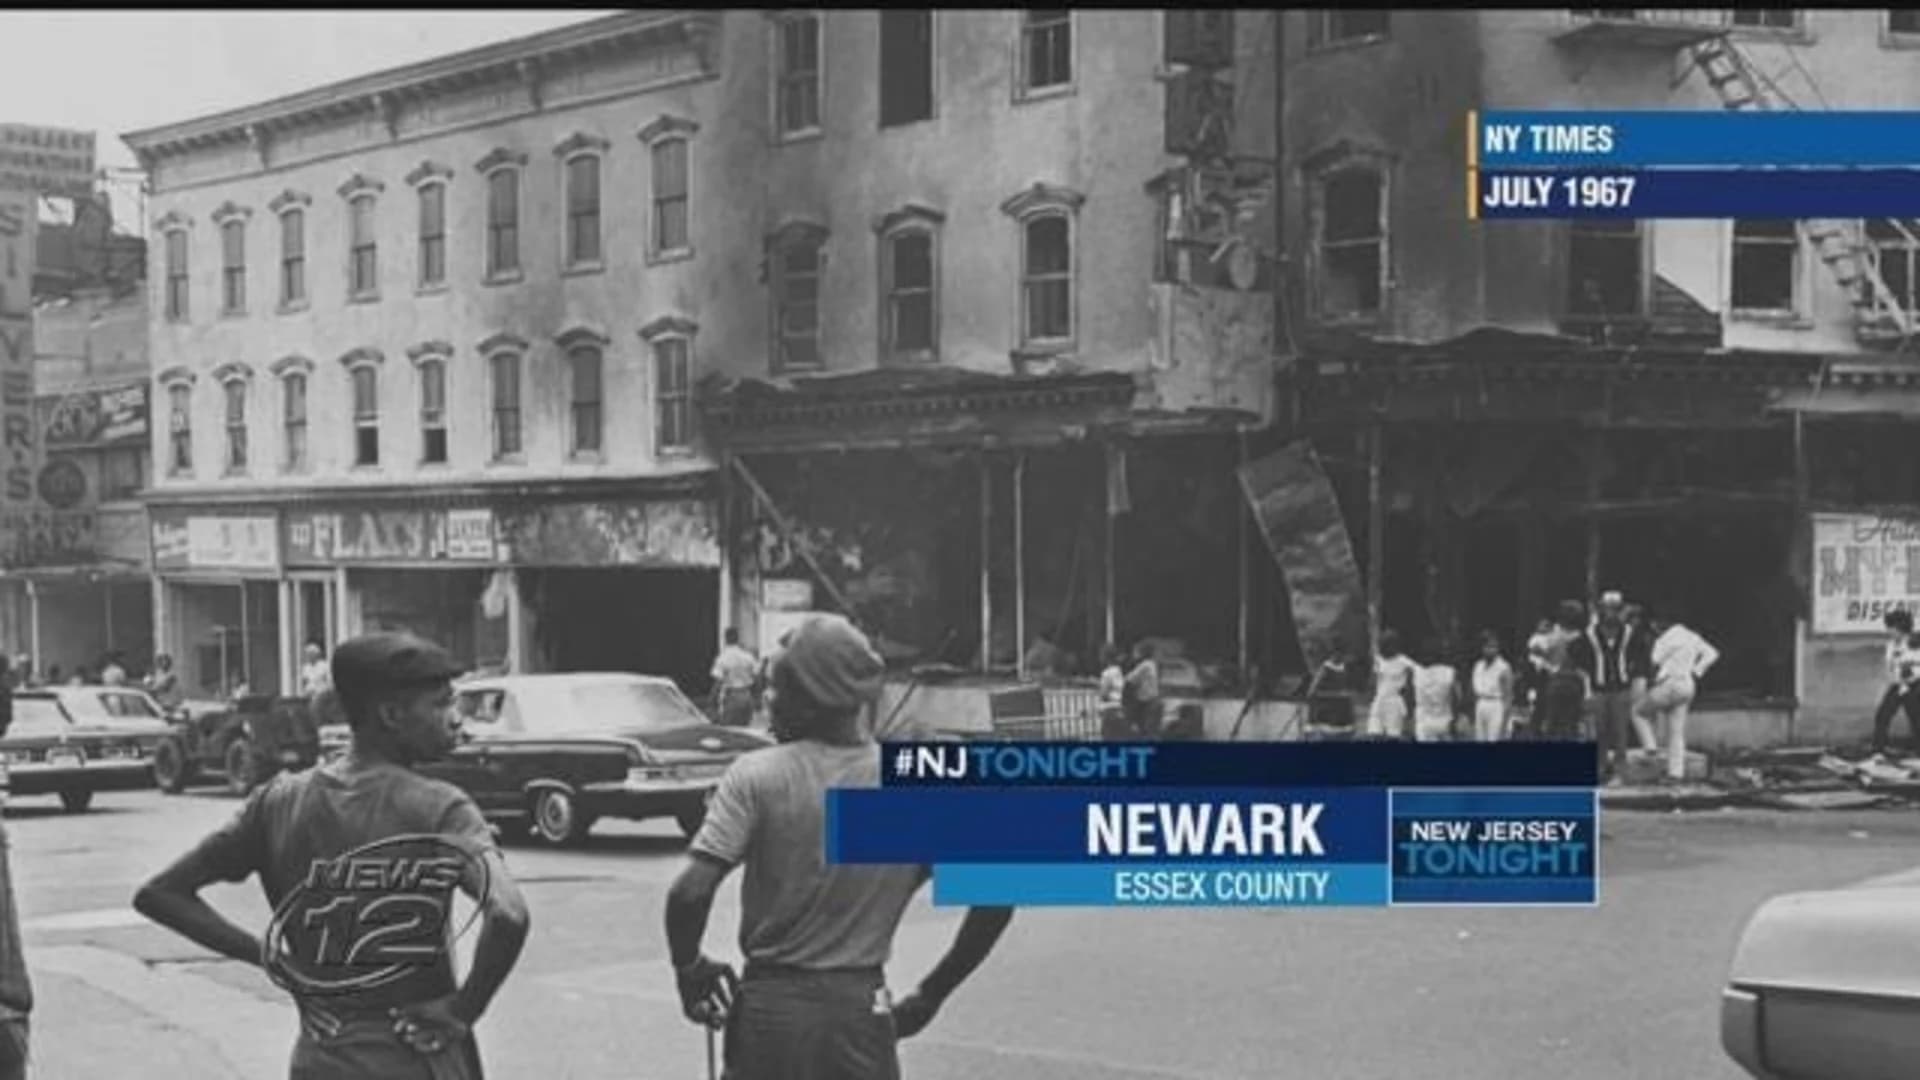 Events in Newark mark 50 years since city riots